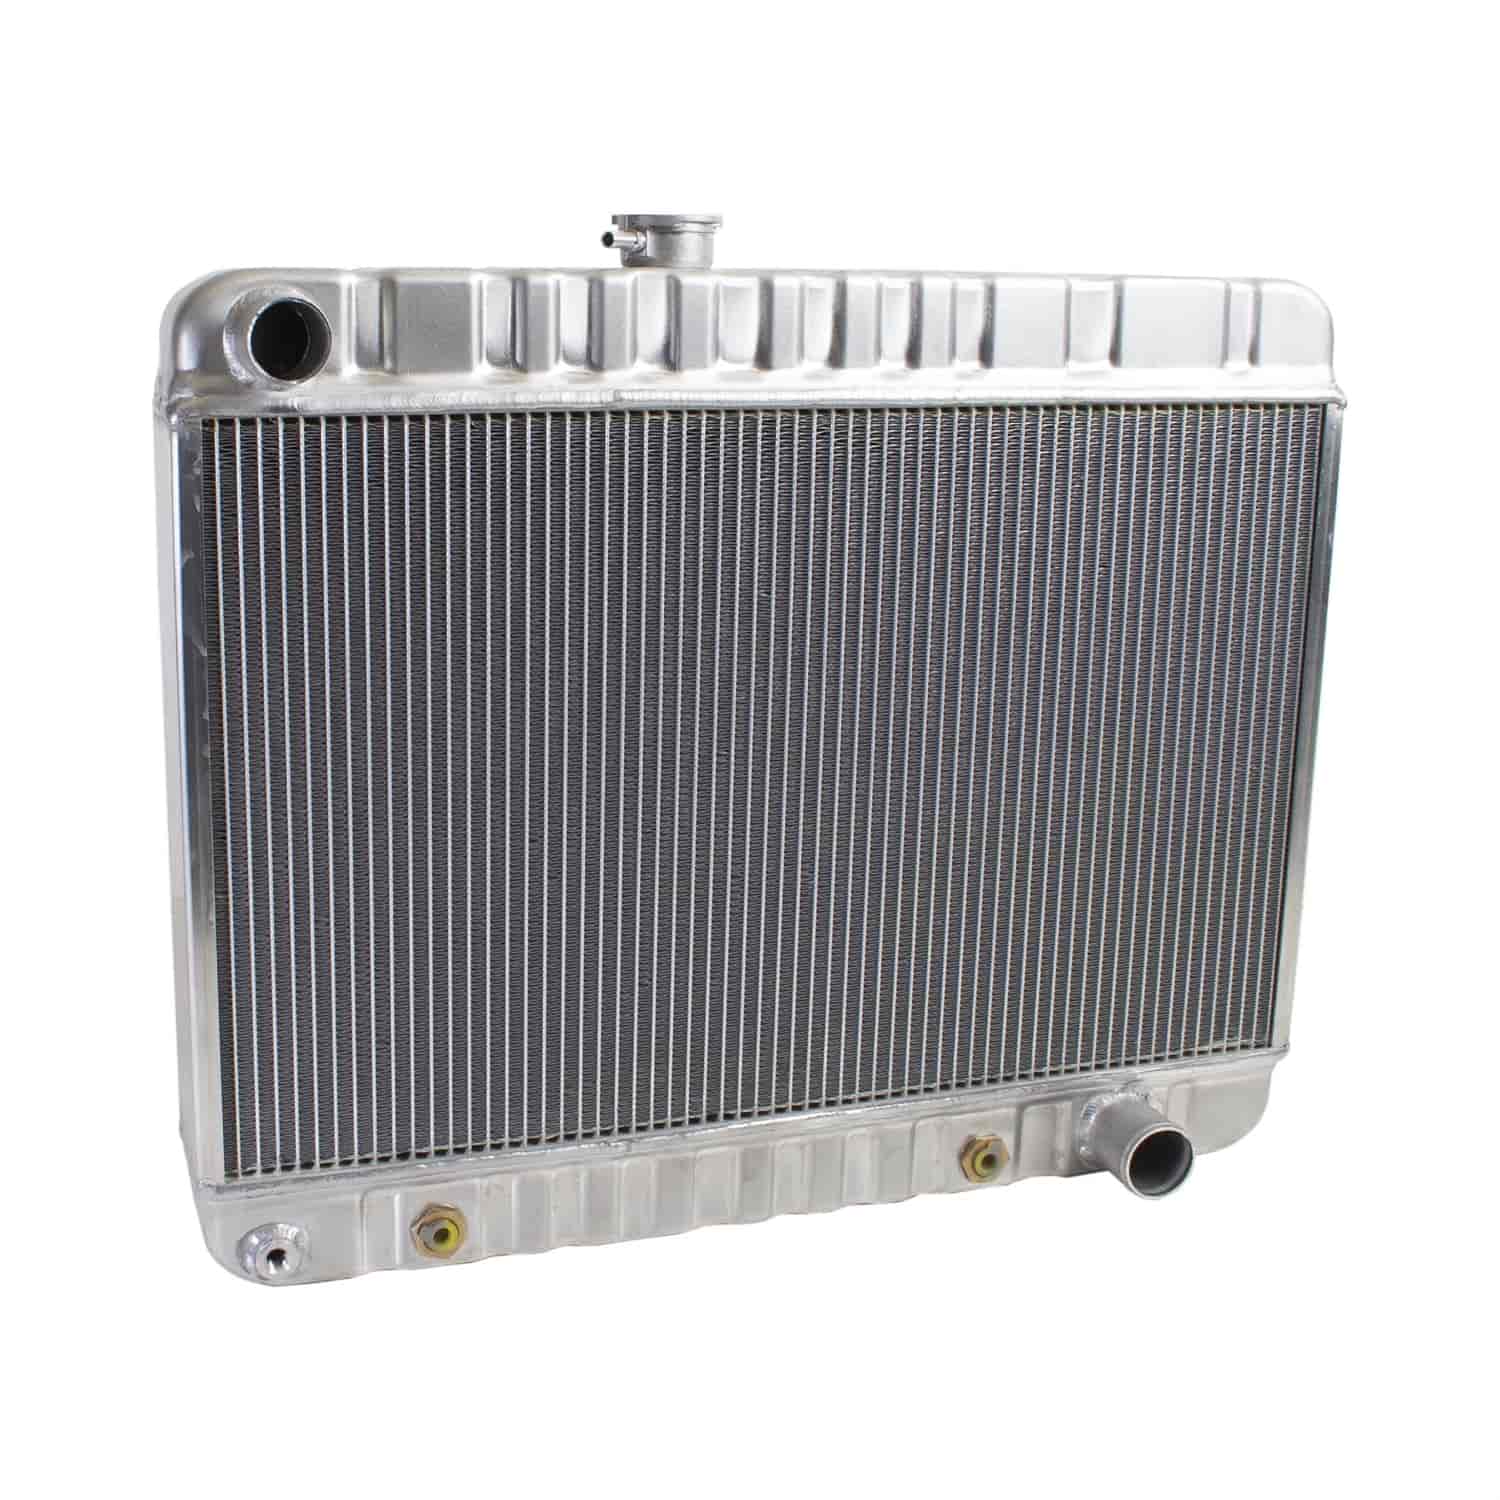 ExactFit Radiator for 1965-1967 GTO/Lemans/Tempest with Transmission Cooler